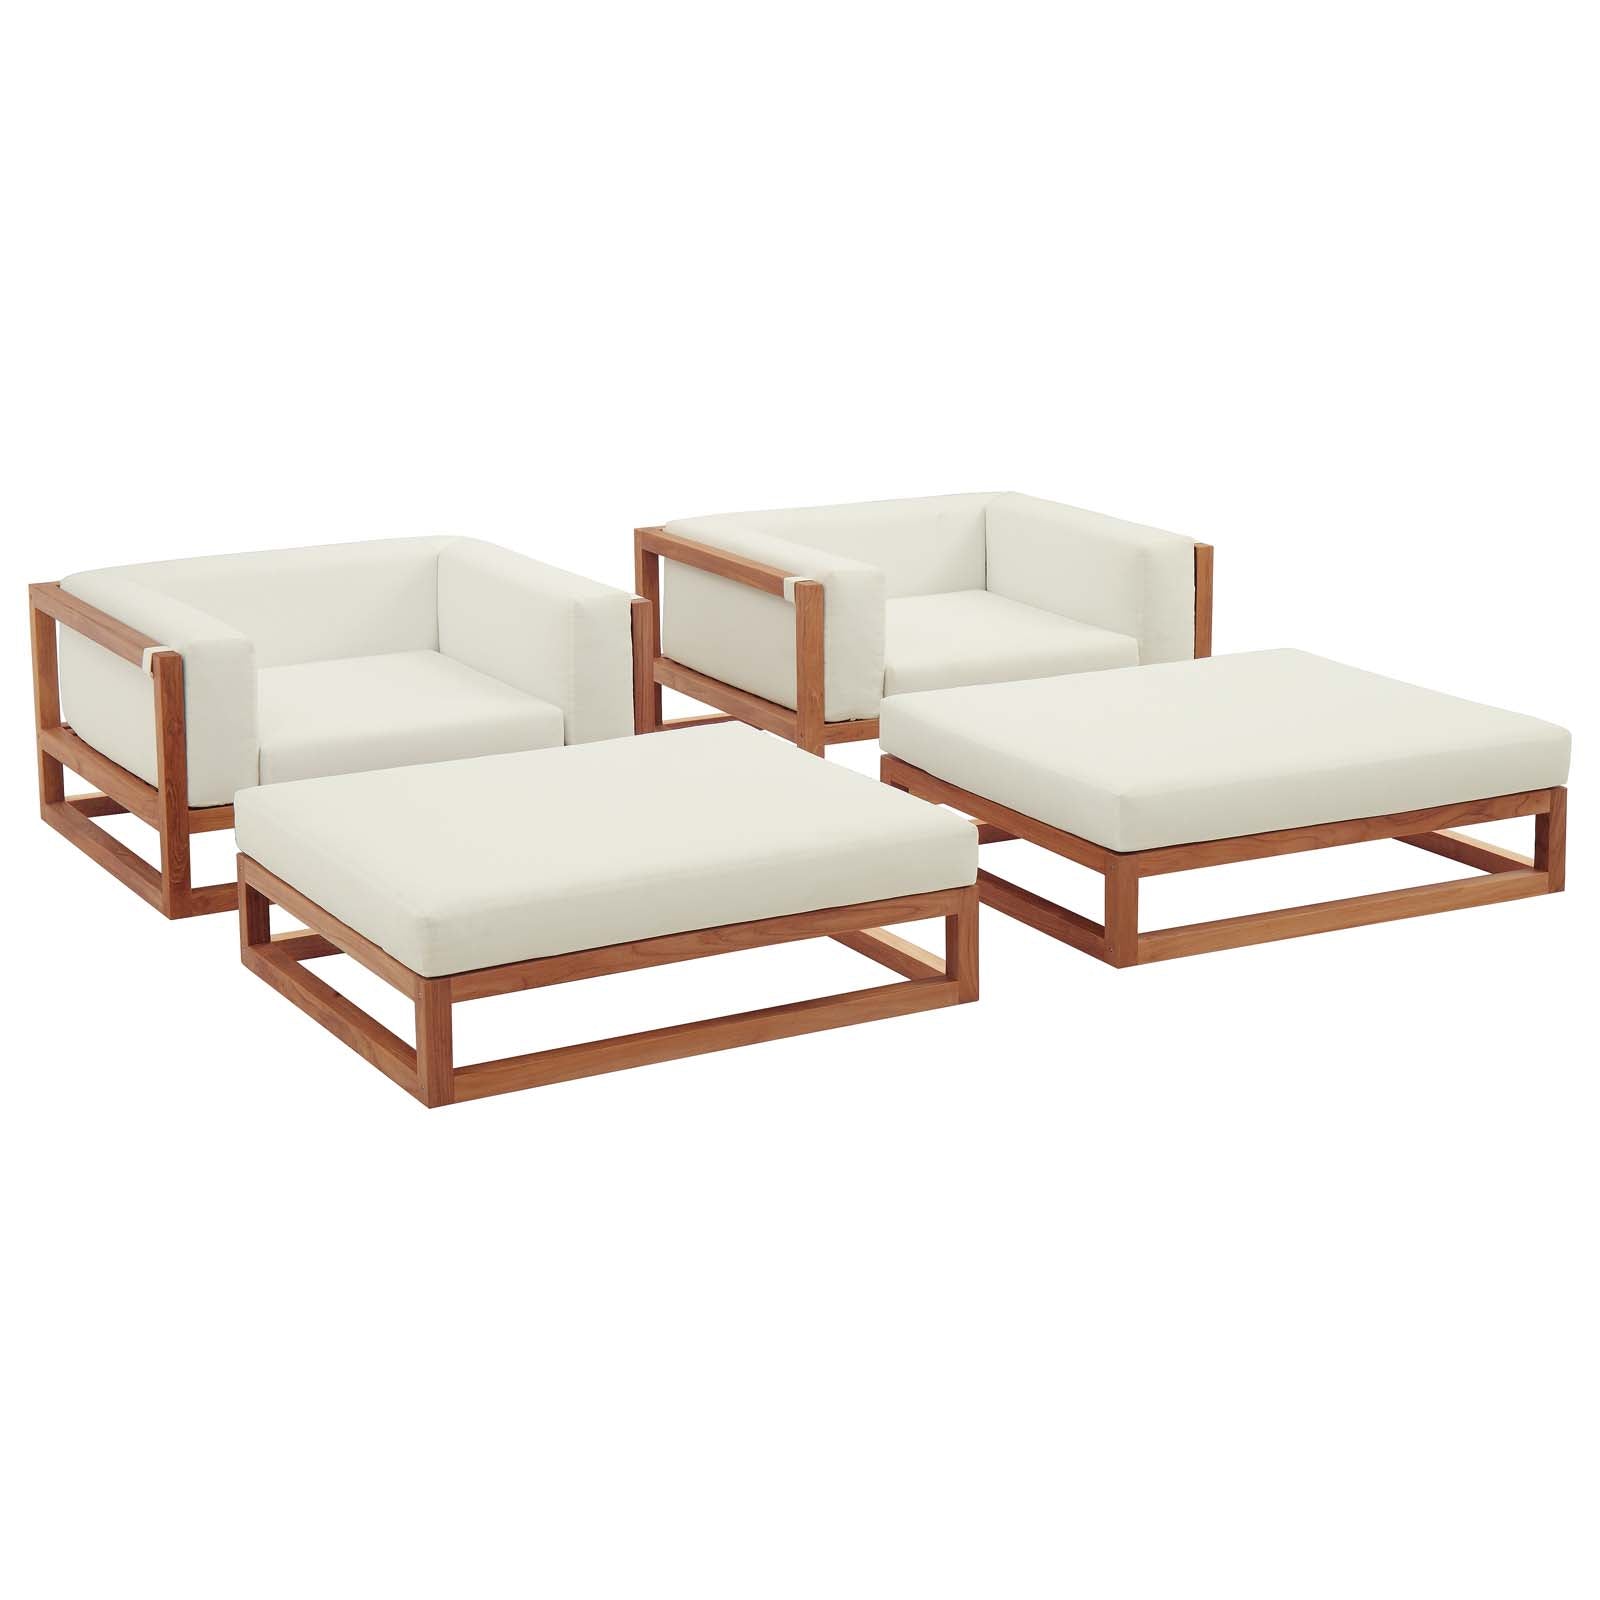 Newbury 4 Piece Outdoor Patio Premium Grade A Teak Wood Set With Ottoman With Armrest Ottoman In Natural